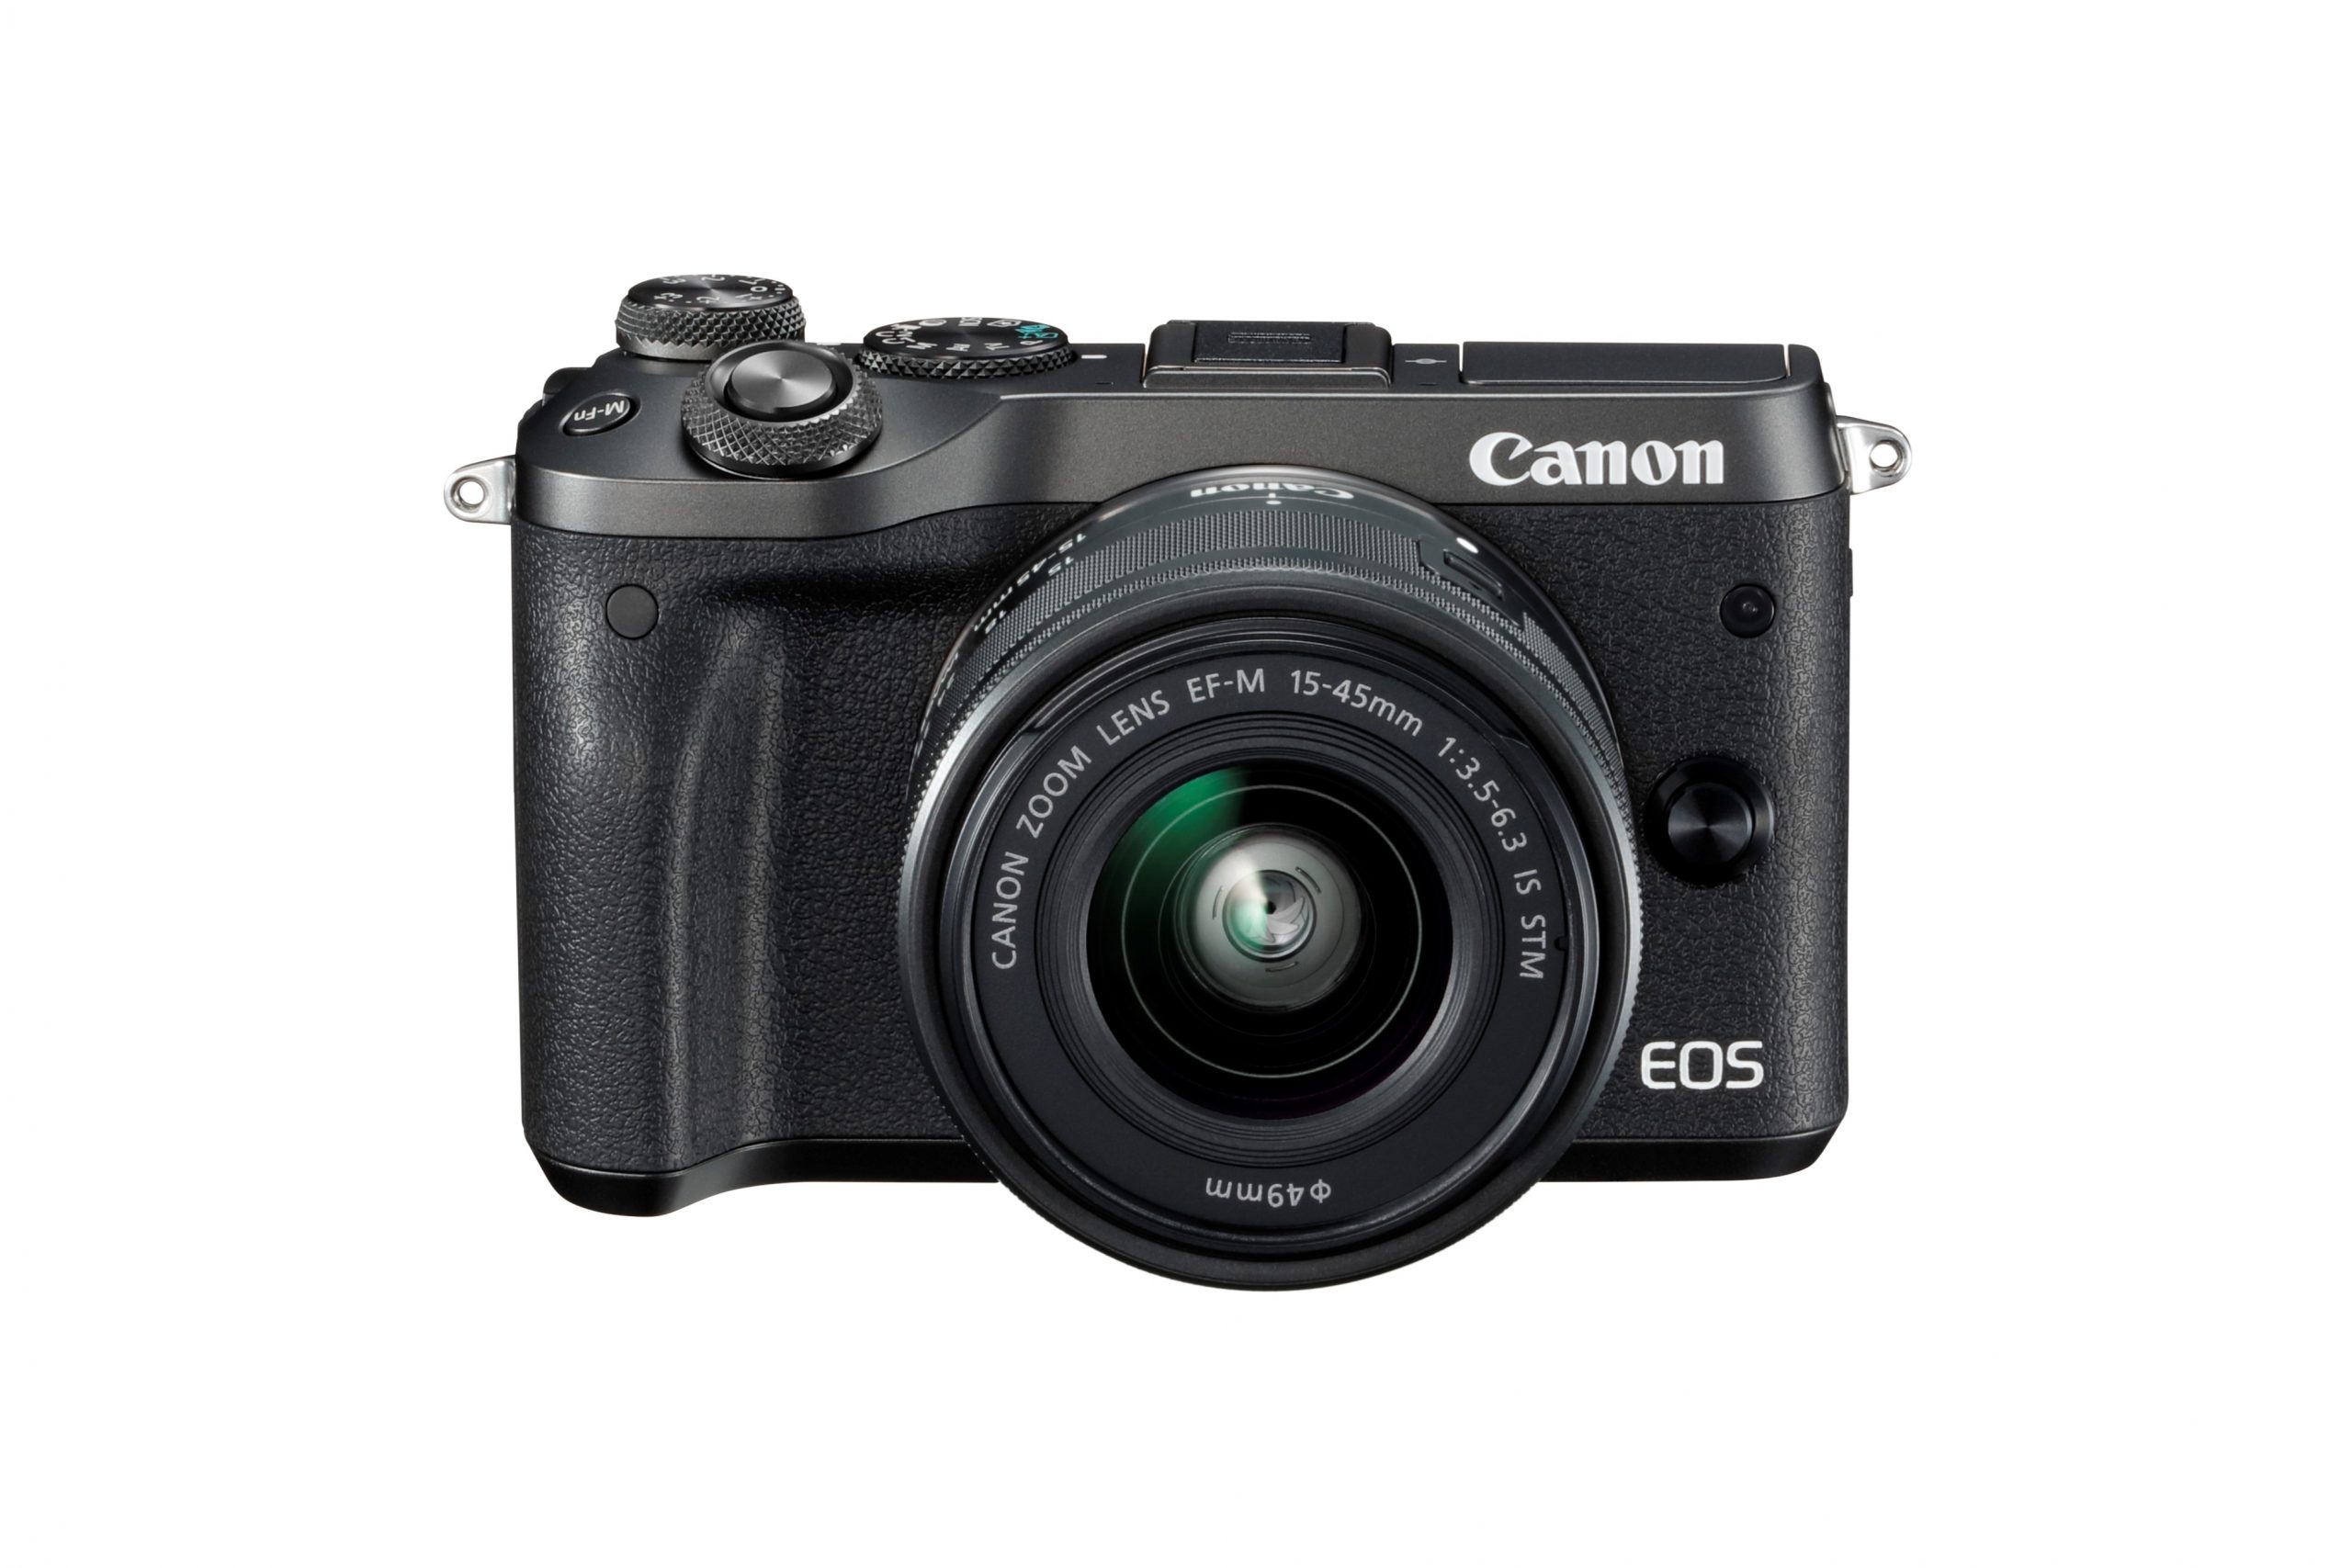 Canon launches the new EOS M6